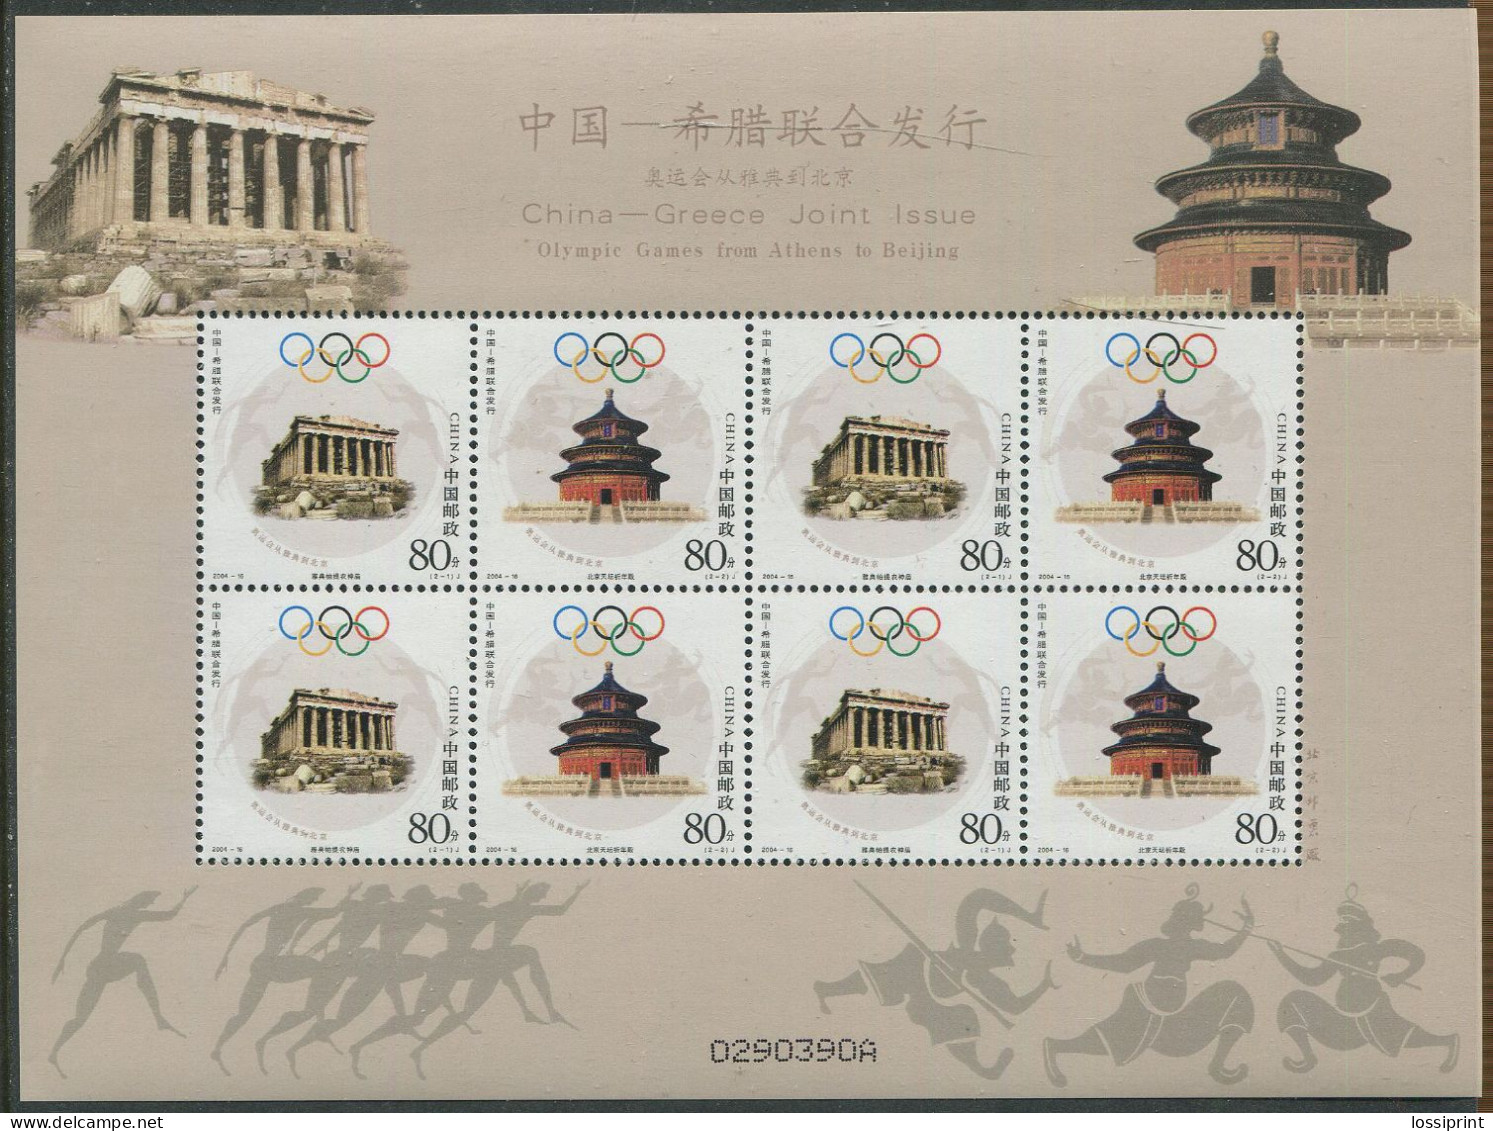 China:Greece:Unused Block Athens And Beijing Olympic Games, Joint Issue, 2004, MNH - Verano 2004: Atenas